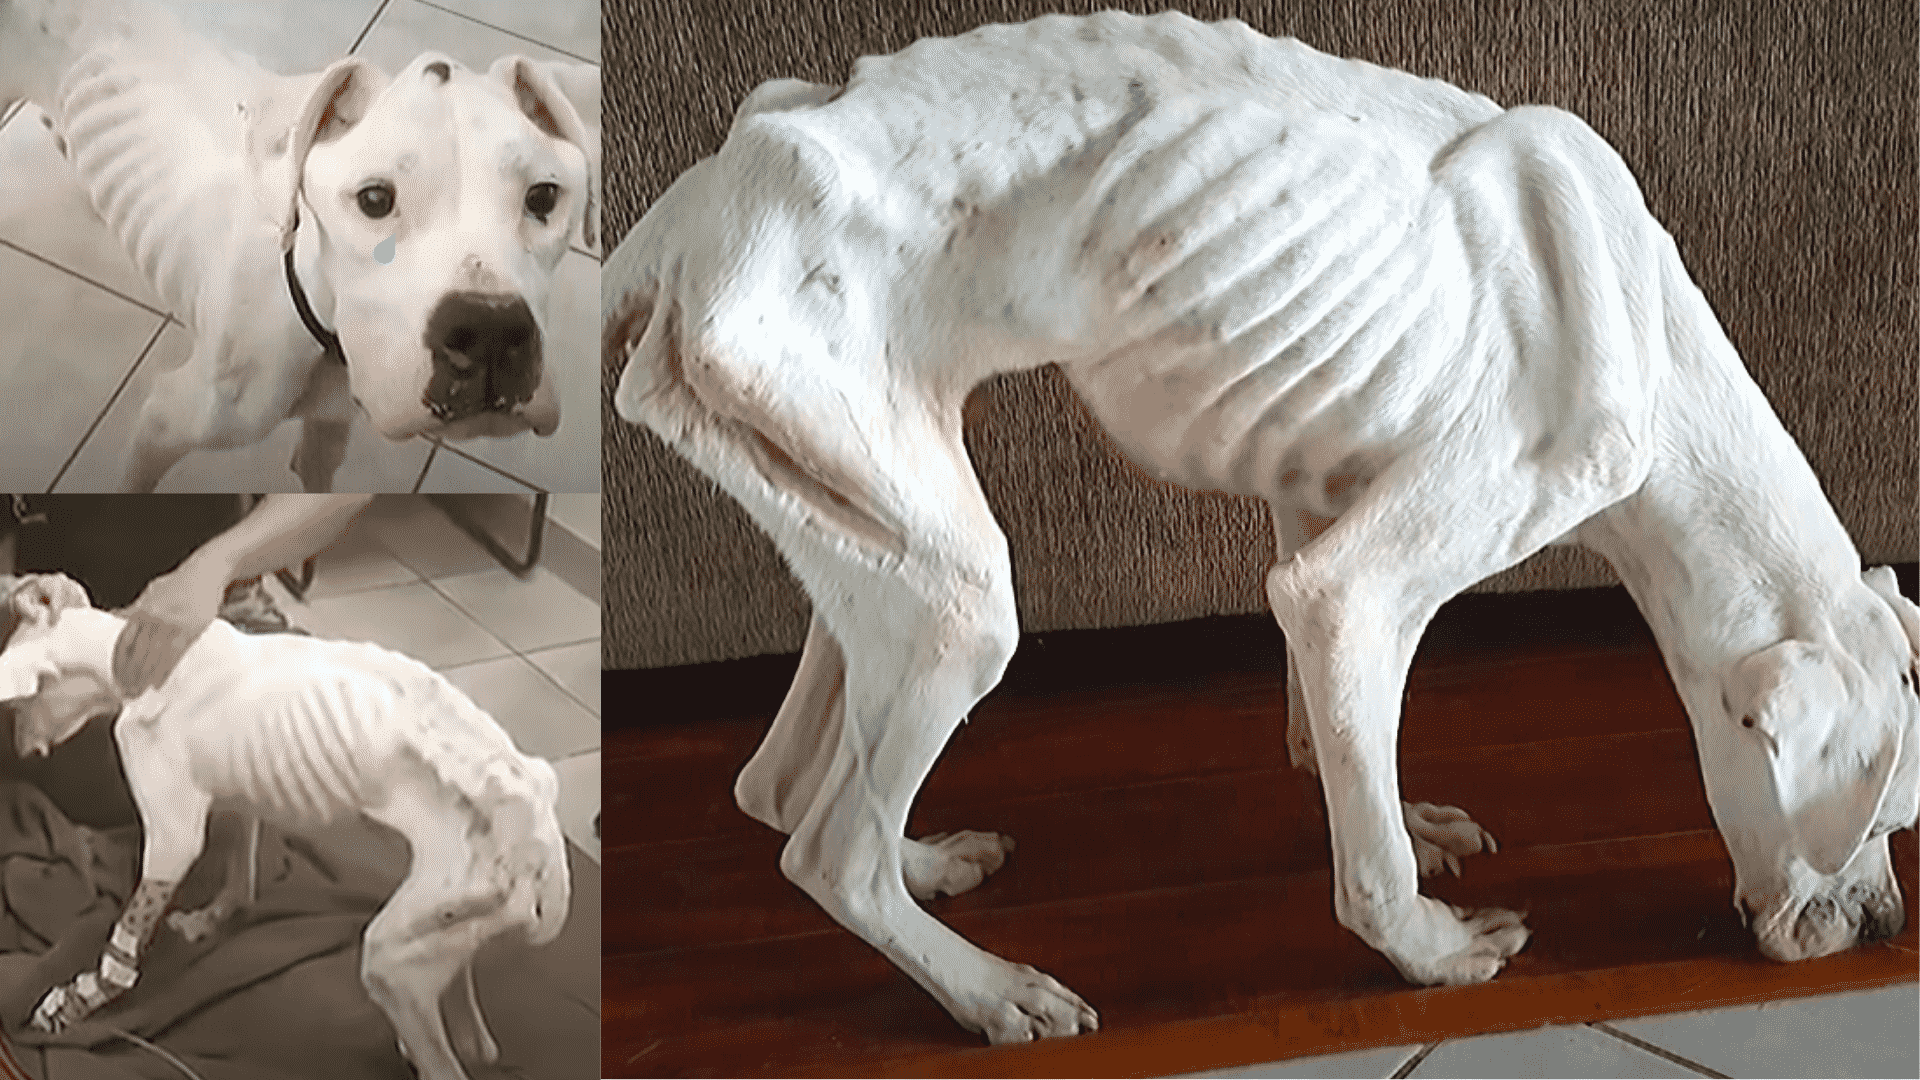 A Man Thought He Saw a Bag of Bones- Turns Out He Saw A Malnourished Dog Who Was Starving and Dying!